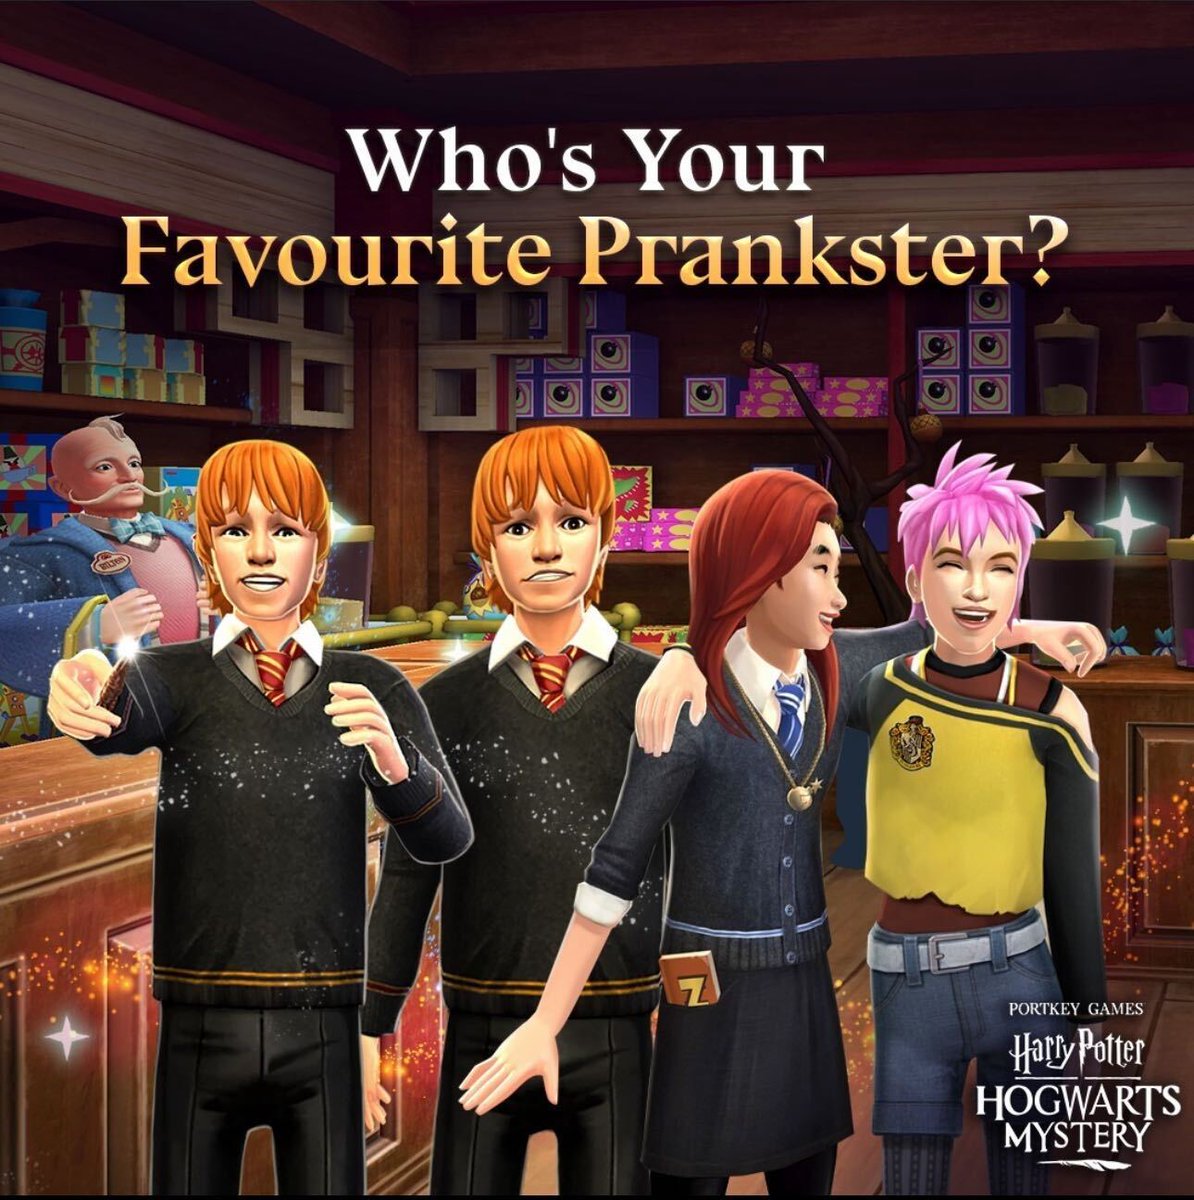 April Fool's Day is just on the horizon! Let us know who your favourite Hogwarts prankster is!